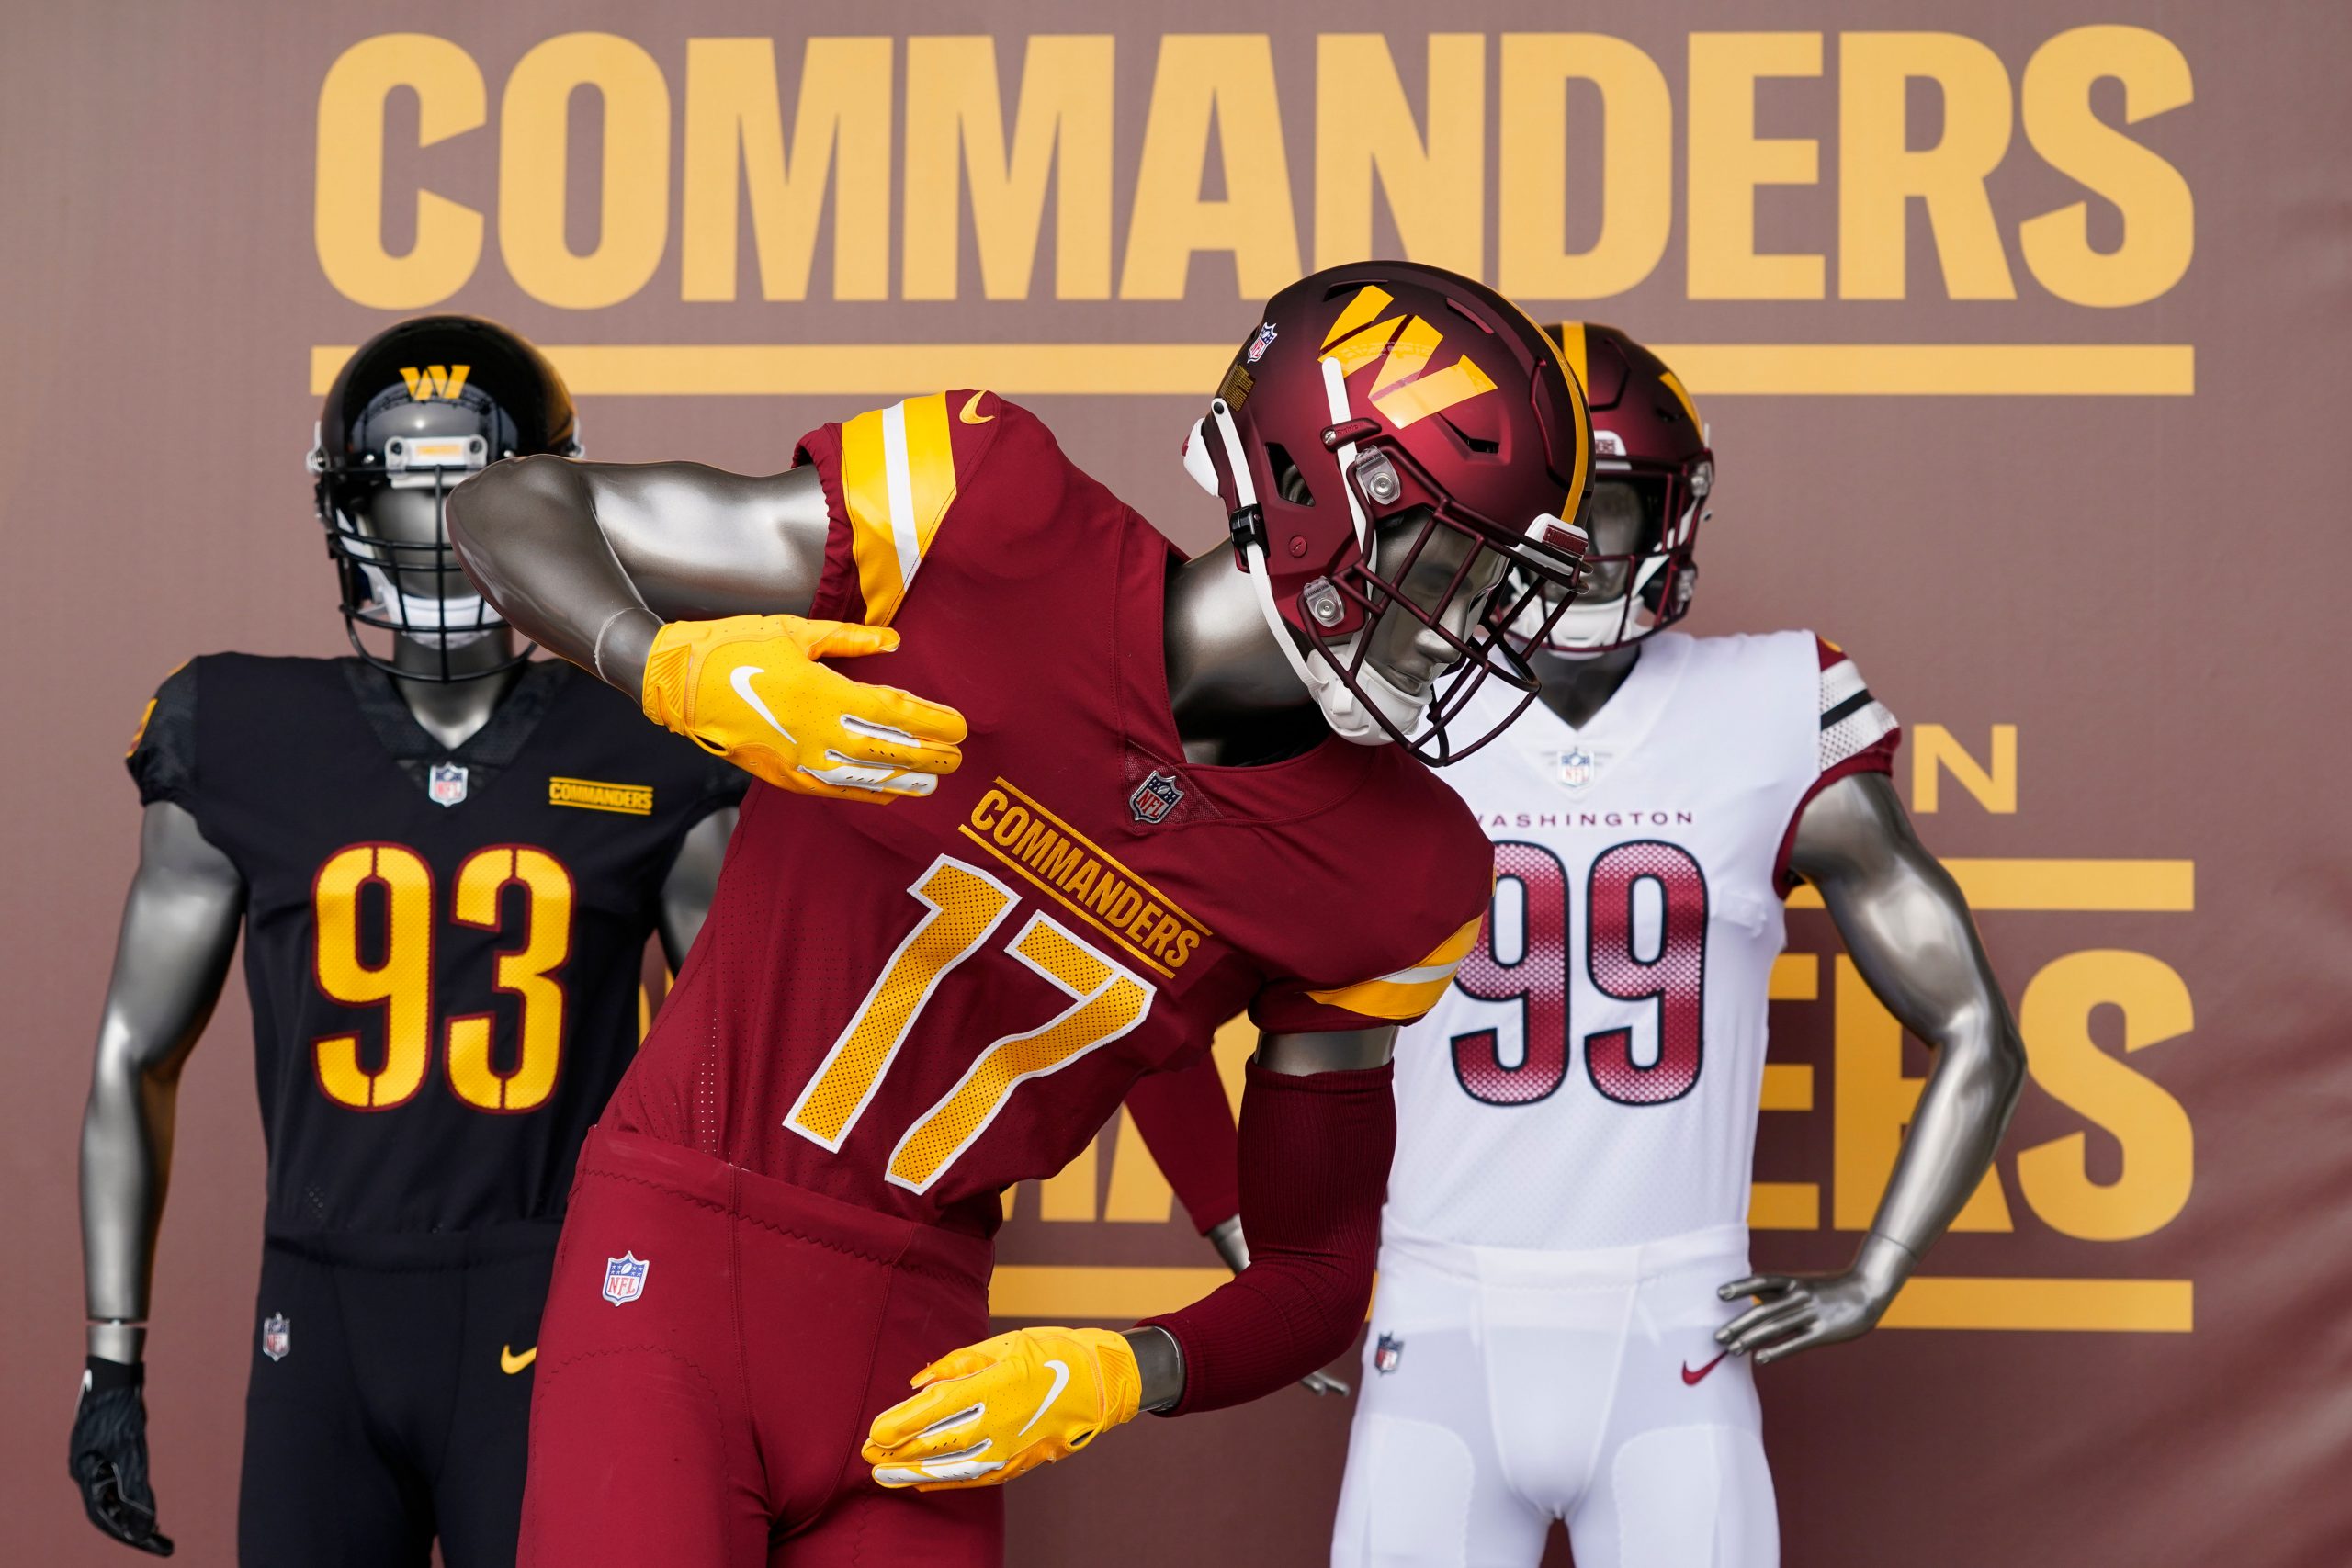 NFL: Why Washington Football Team changed their name to Commanders